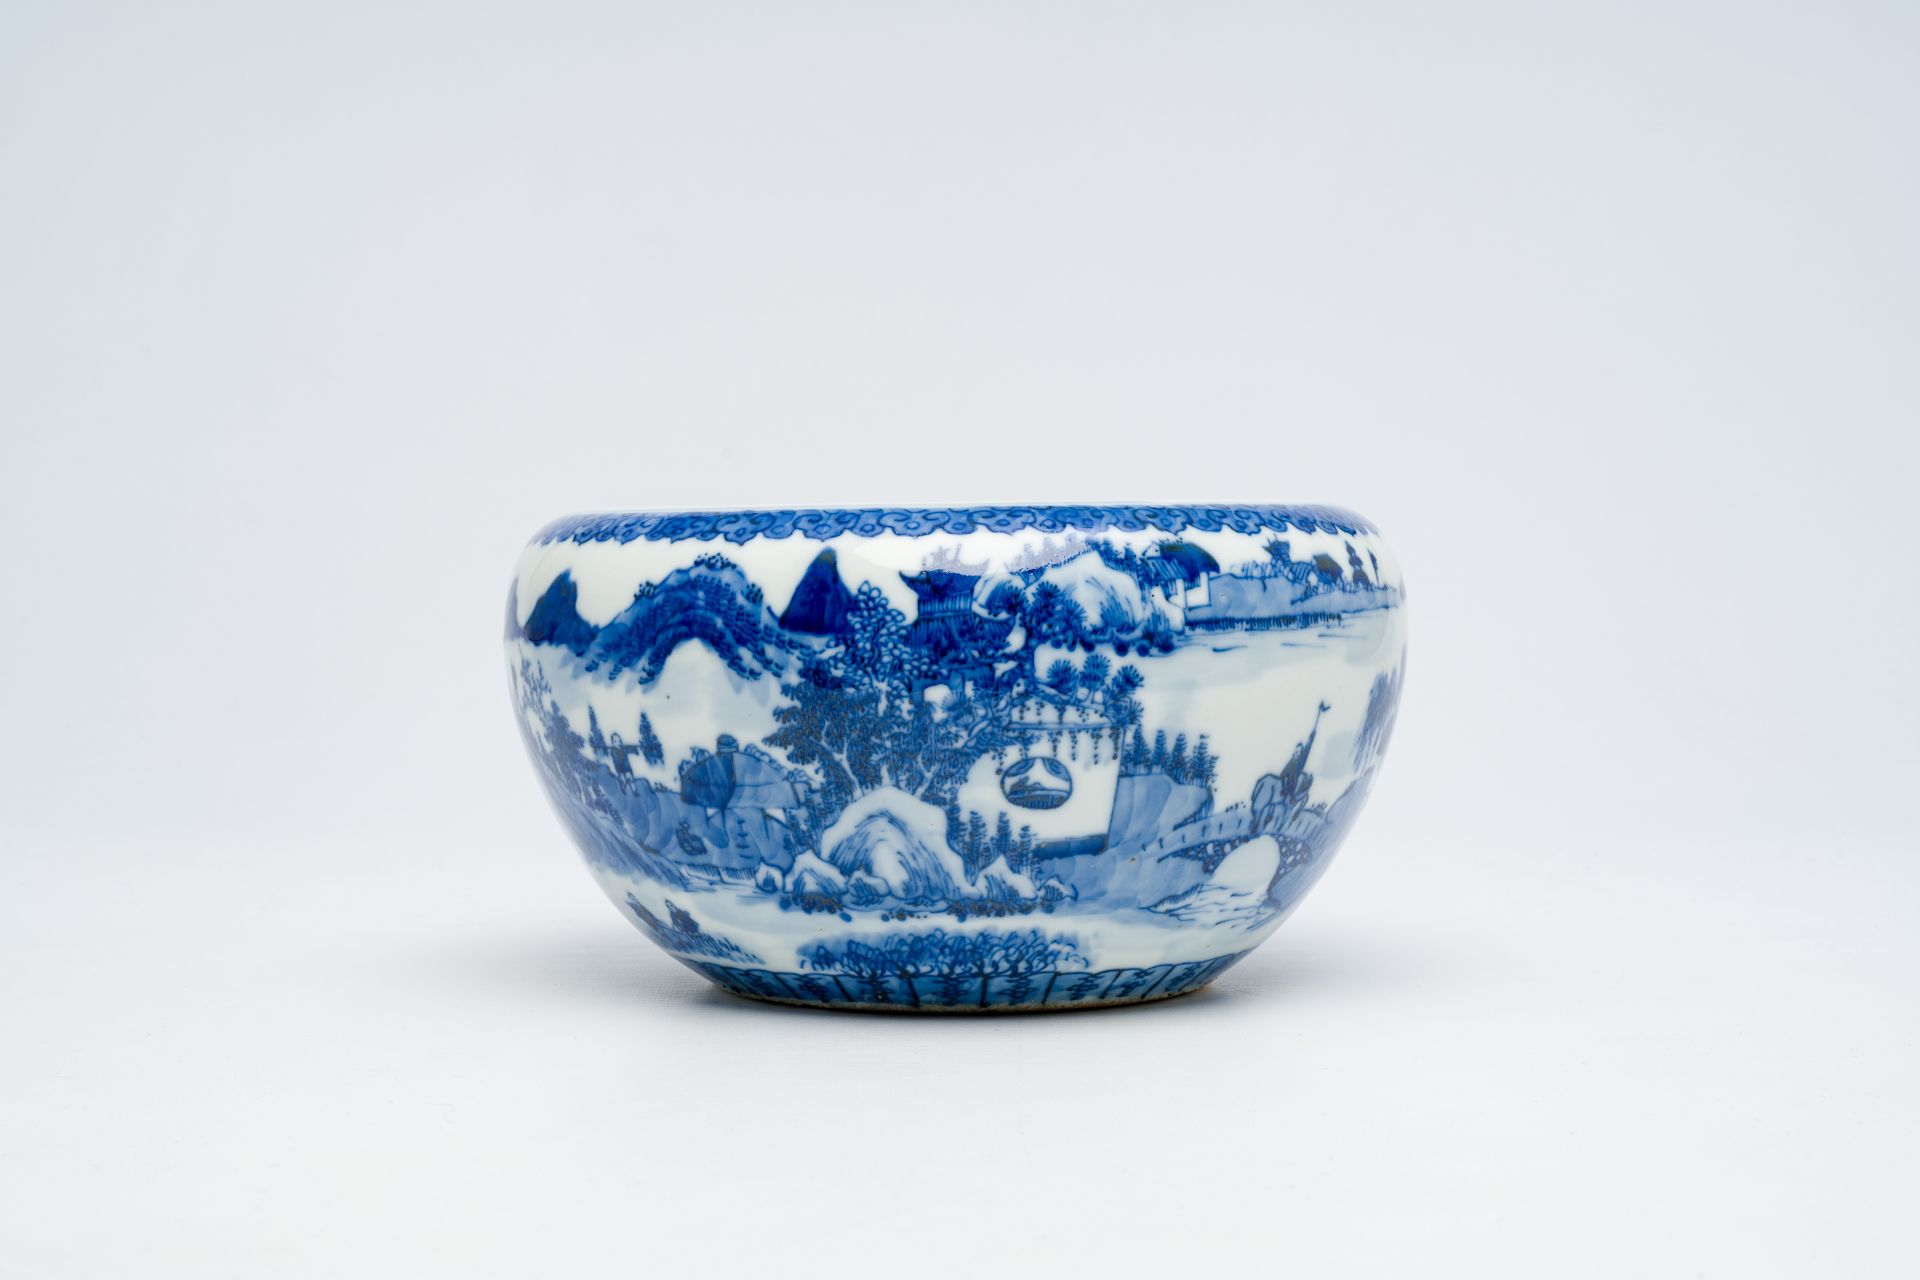 A varied collection of Chinese blue and white porcelain, 19th/20th C. - Image 19 of 30